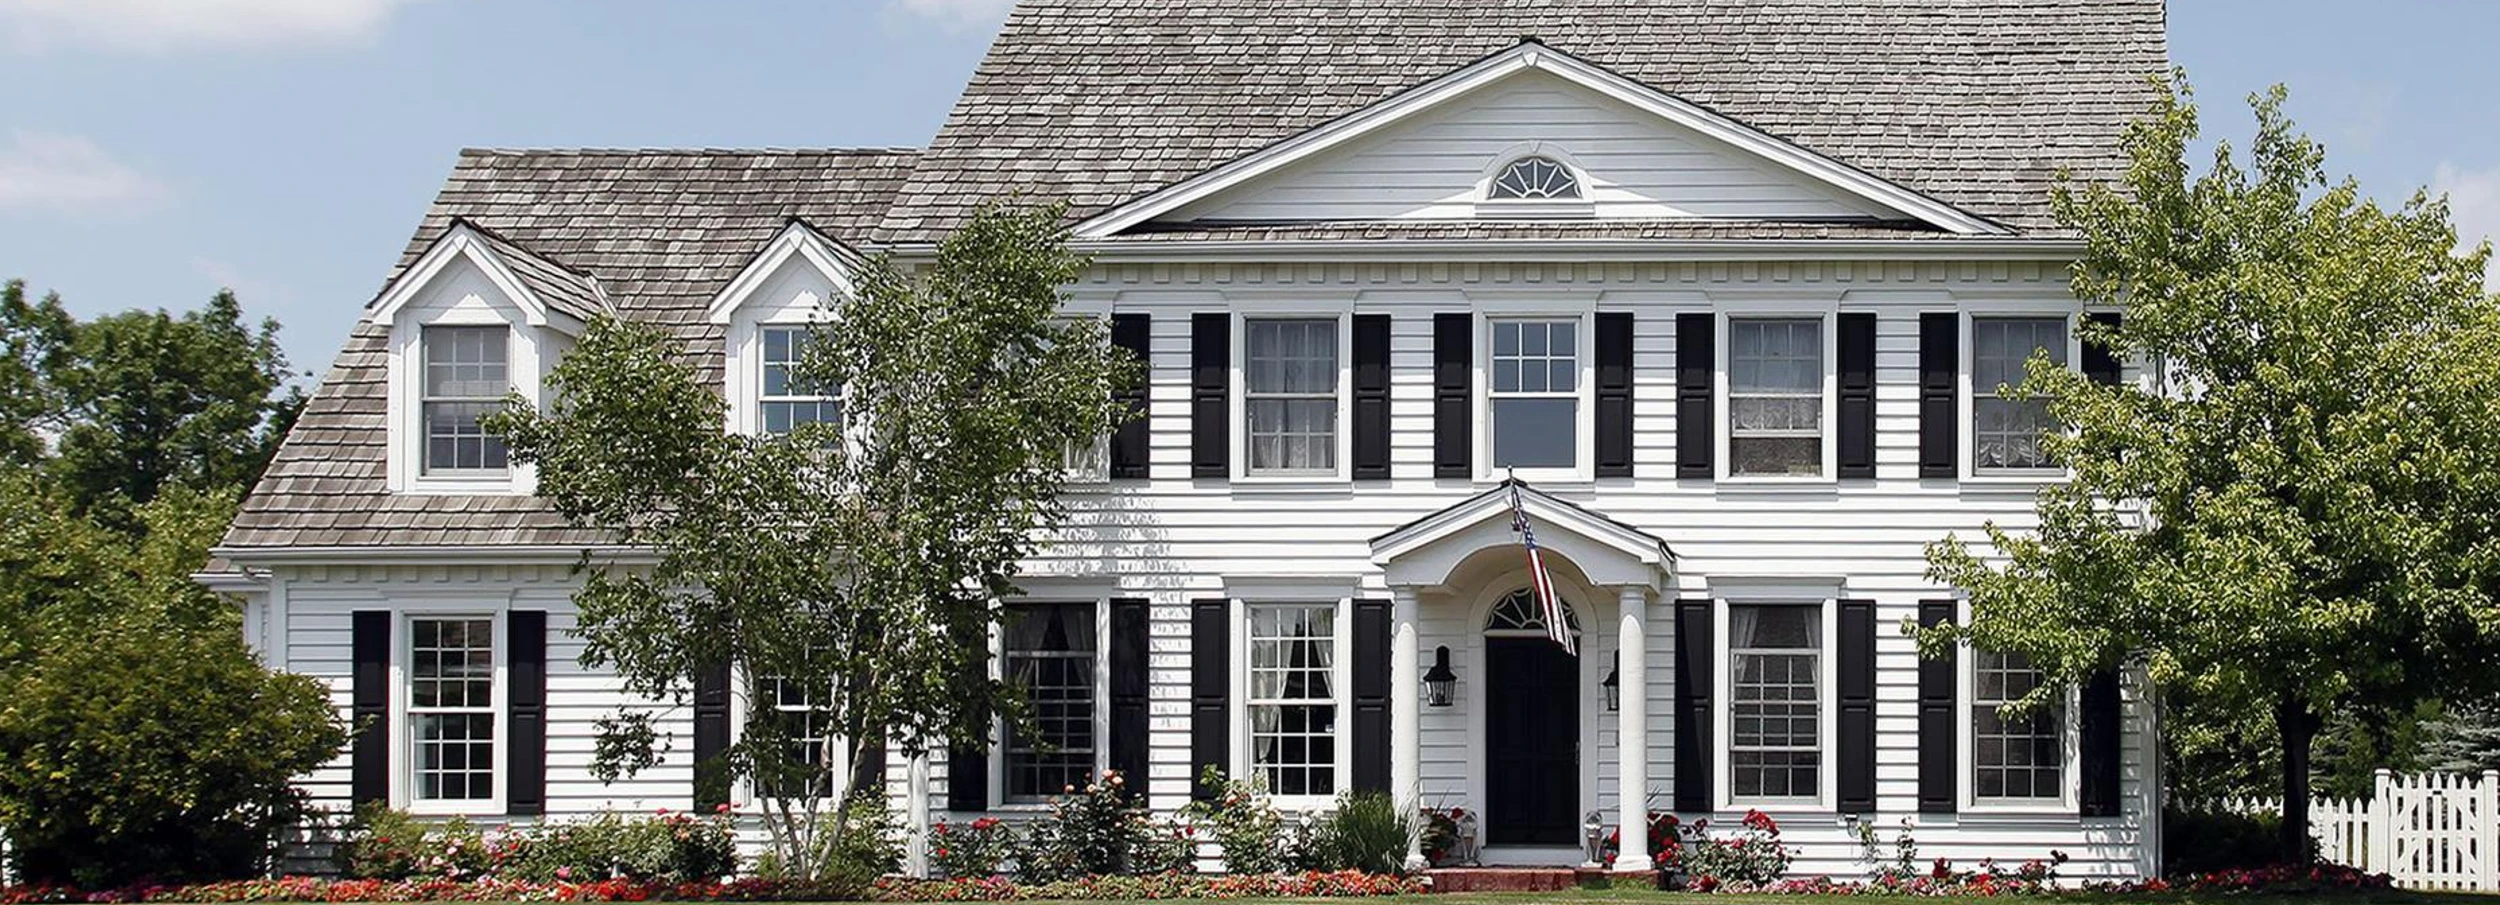 white two story colonial home with American flag out front